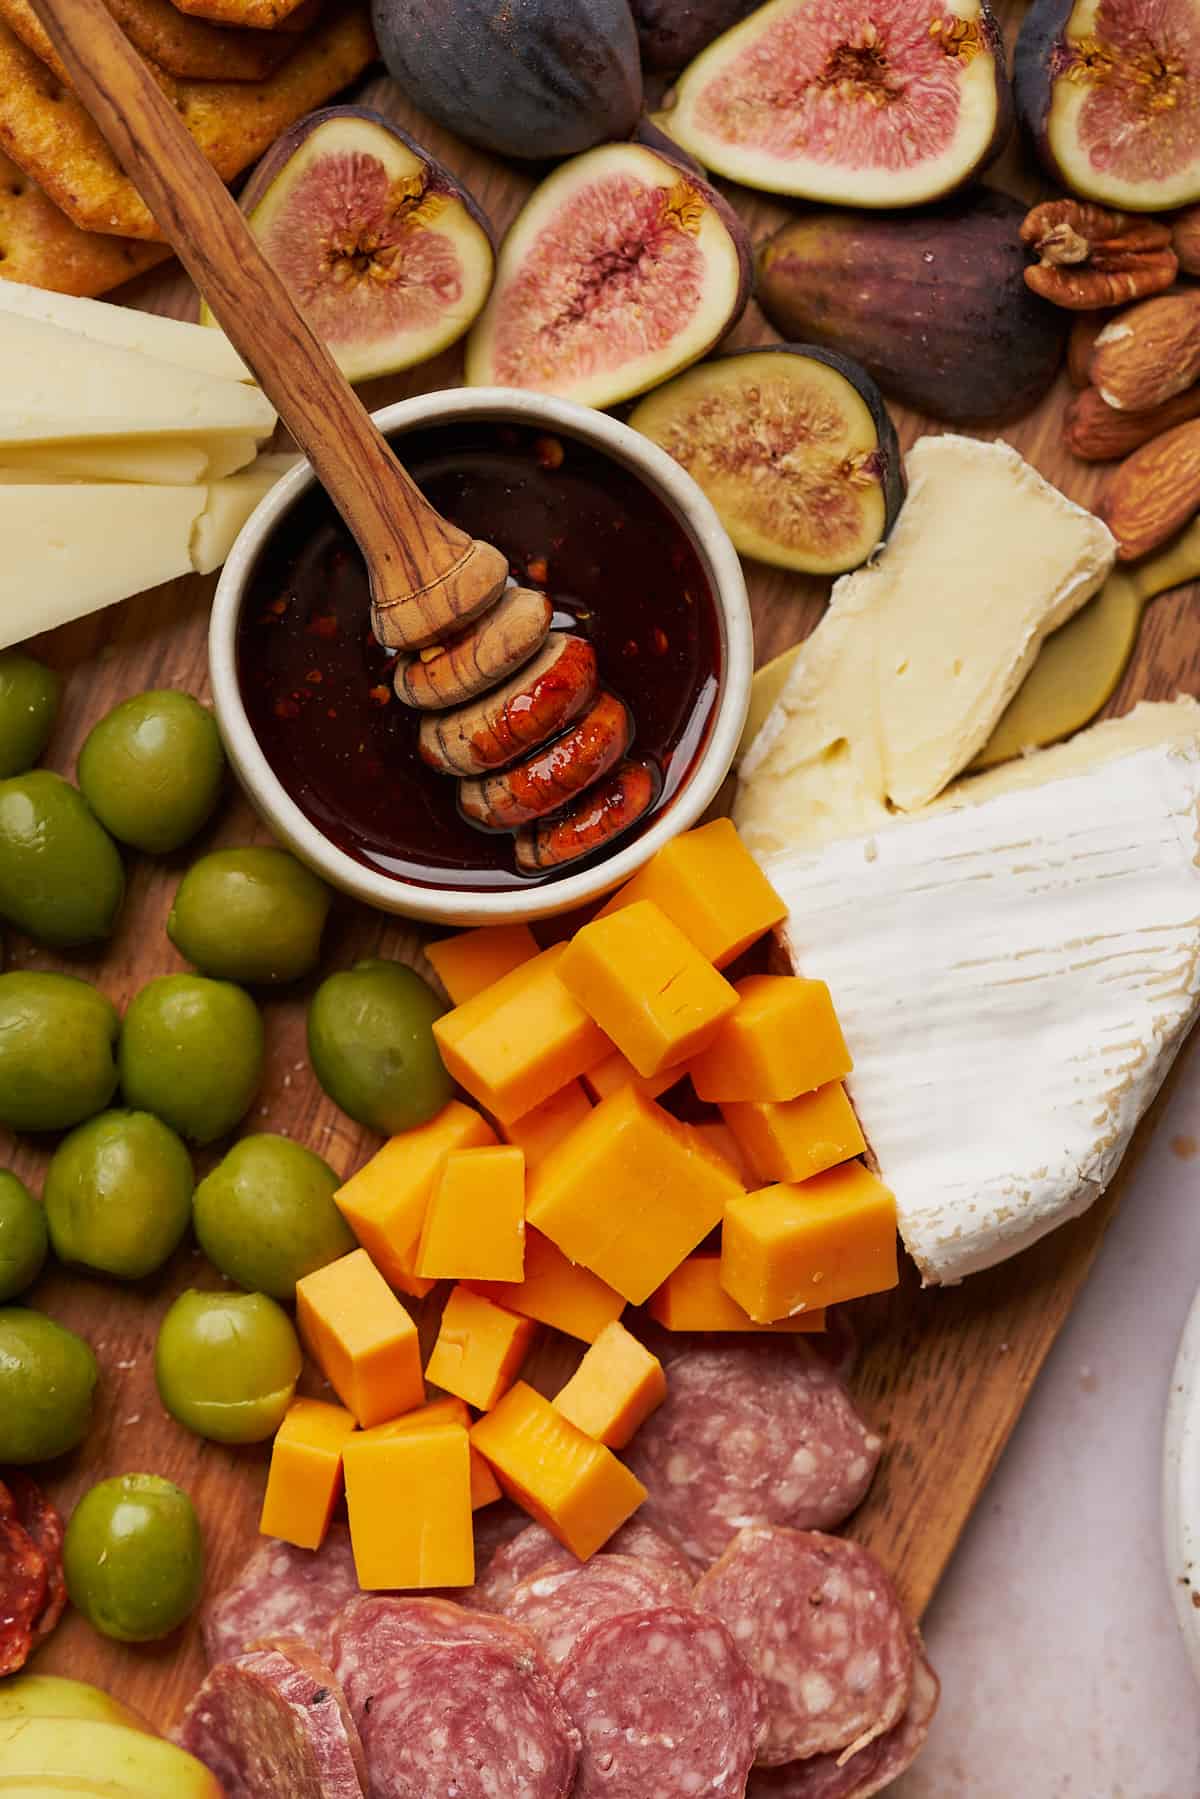 sharp cheddar, castellano olives, brie cheese, figs, manchego, hot honey, and salami bites.